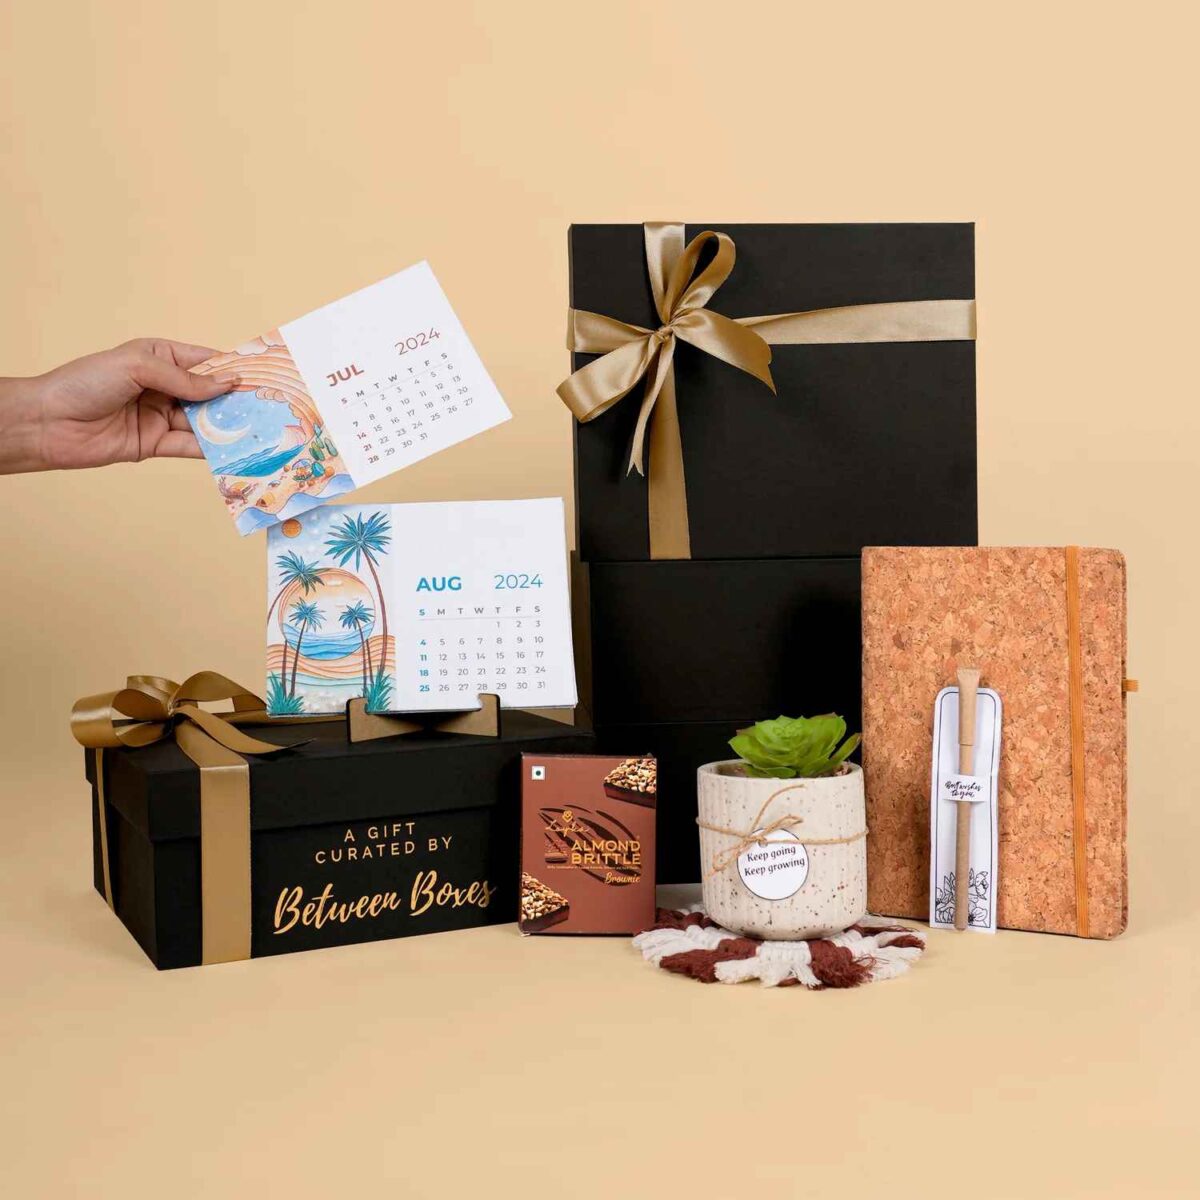 Corporate Gift Hampers Ideas: Creating Memorable and Impactful Gifts